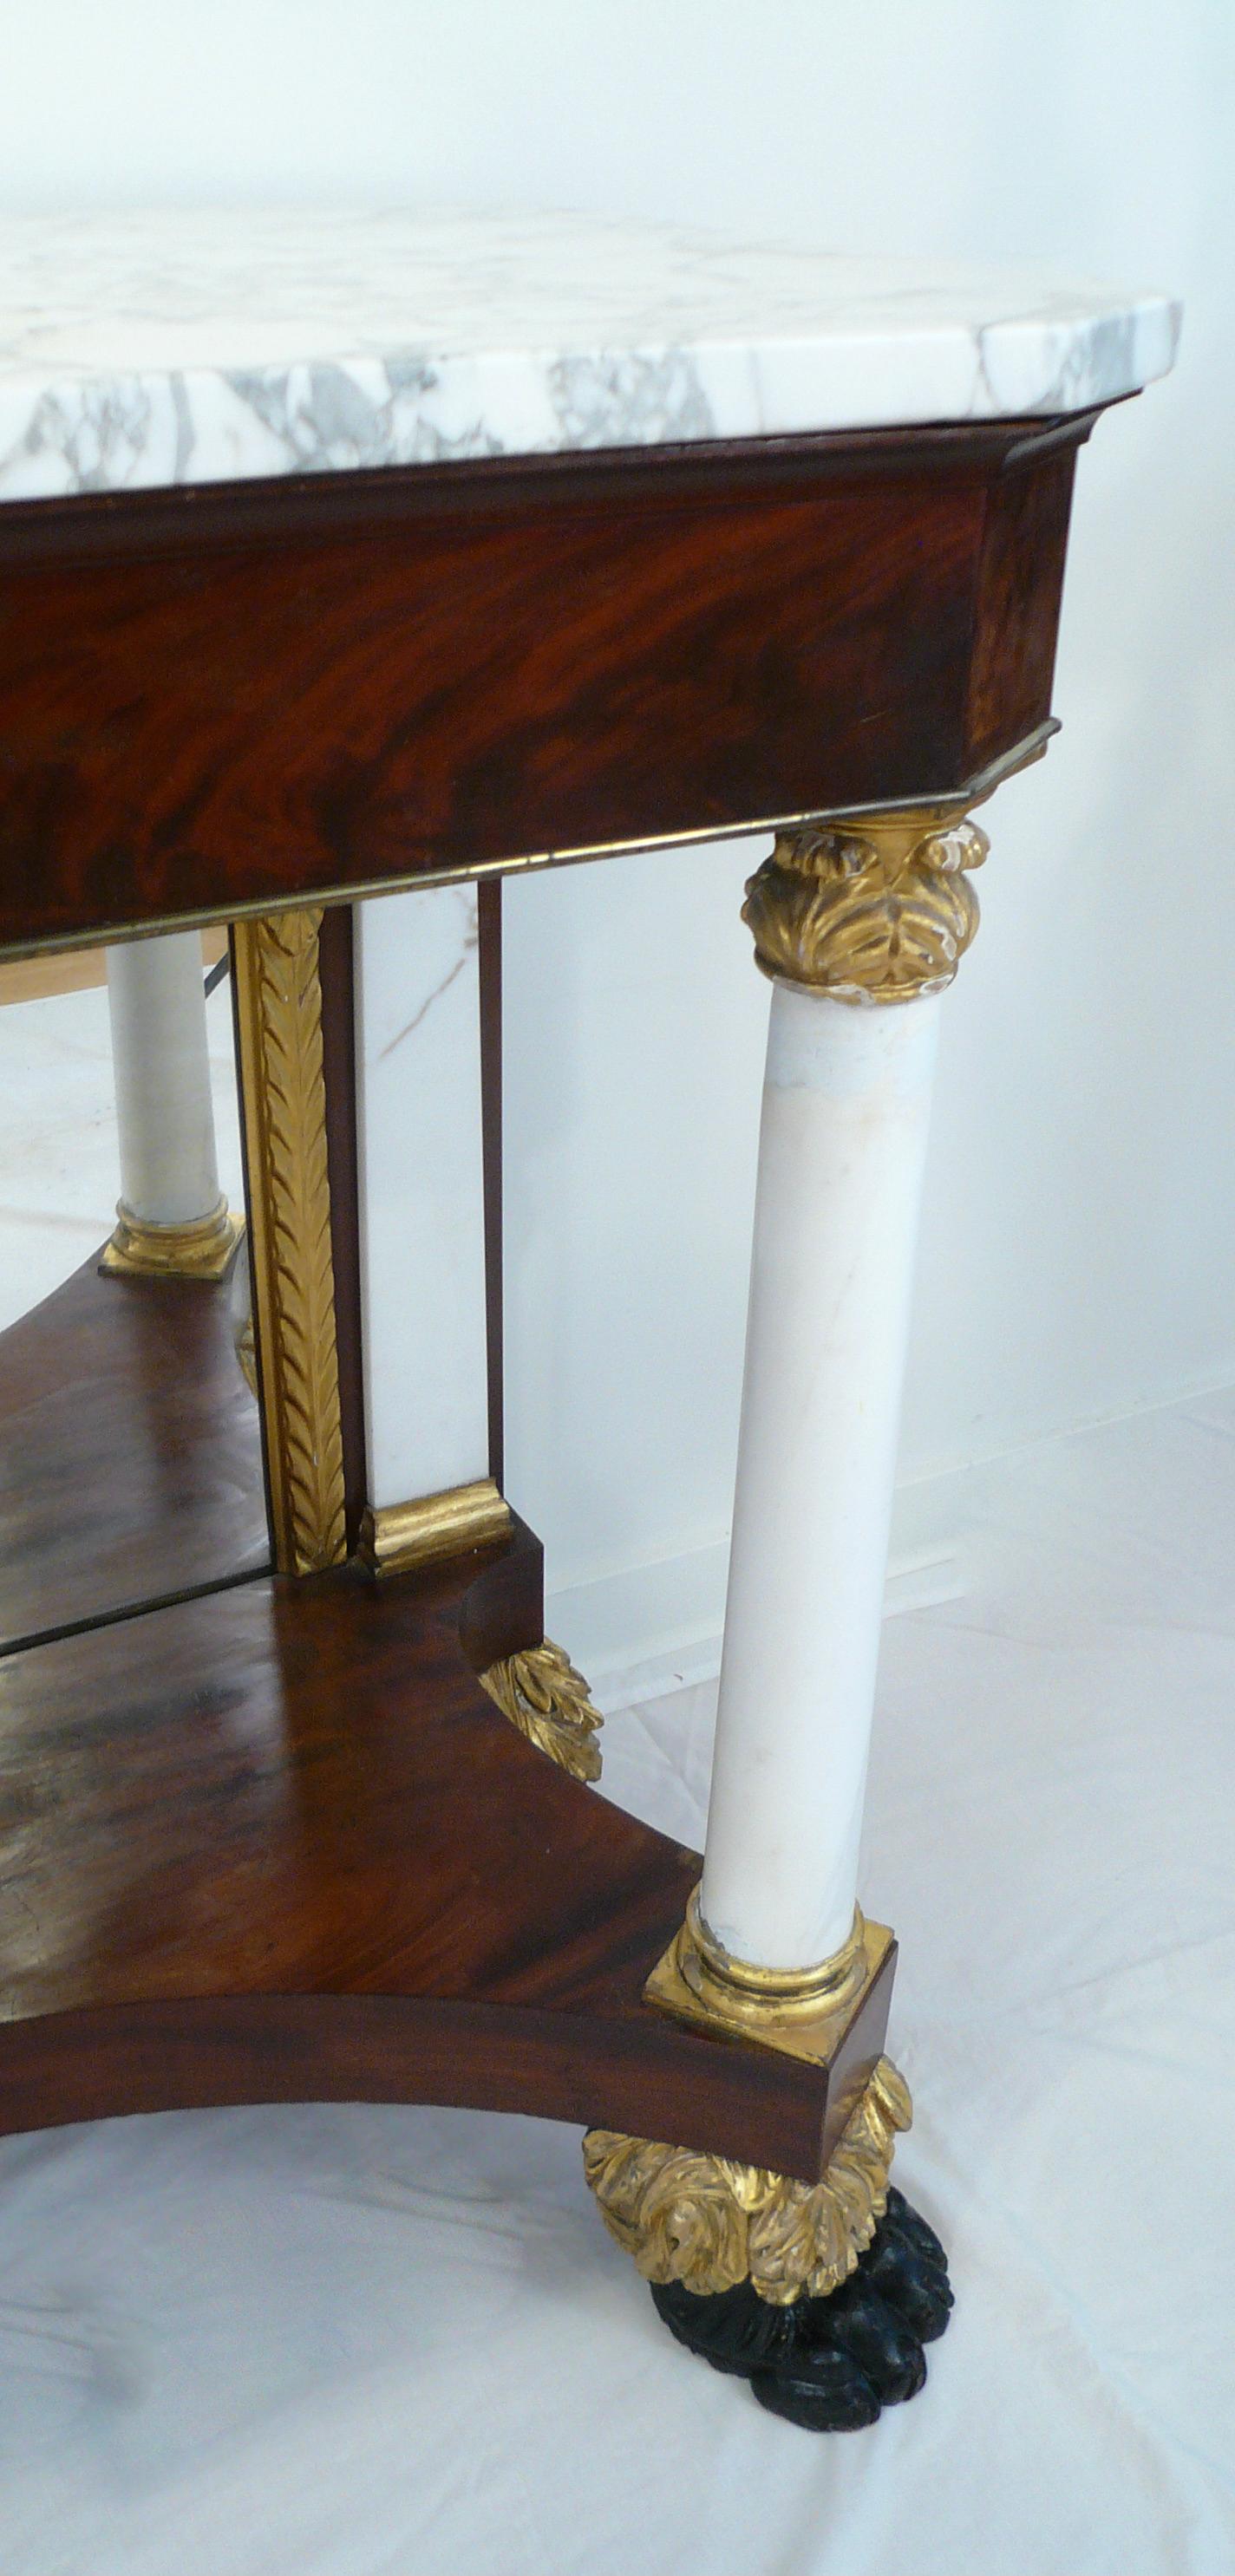 American Classical American Empire or Classical Pier Table, New York